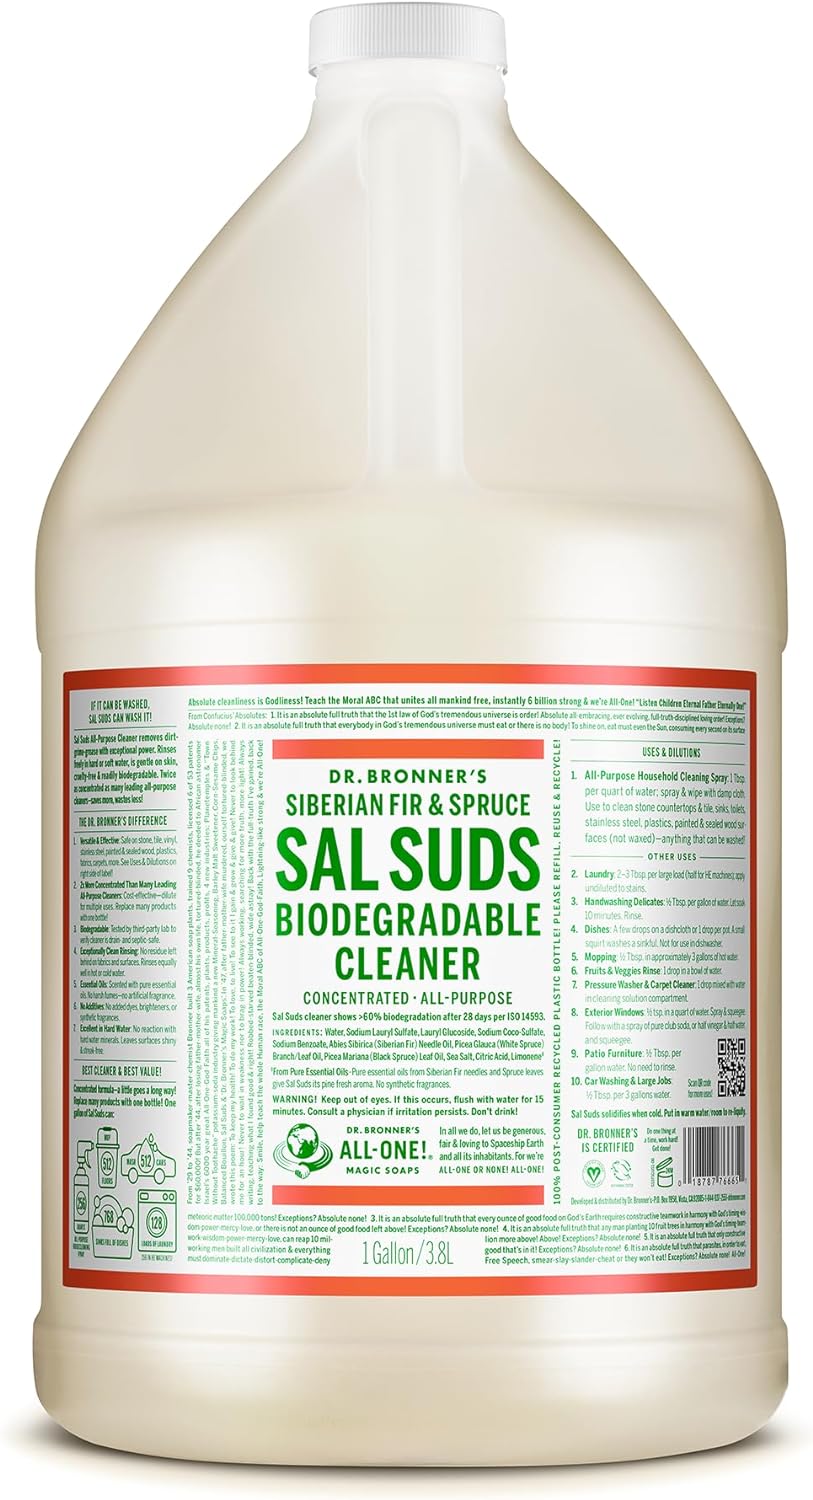 Dr. Bronner's - Sal Suds Biodegradable Cleaner (1 Gallon) - All-Purpose Cleaner, Pine Cleaner for Floors, Laundry and Dishes, Cuts Grease and Dirt